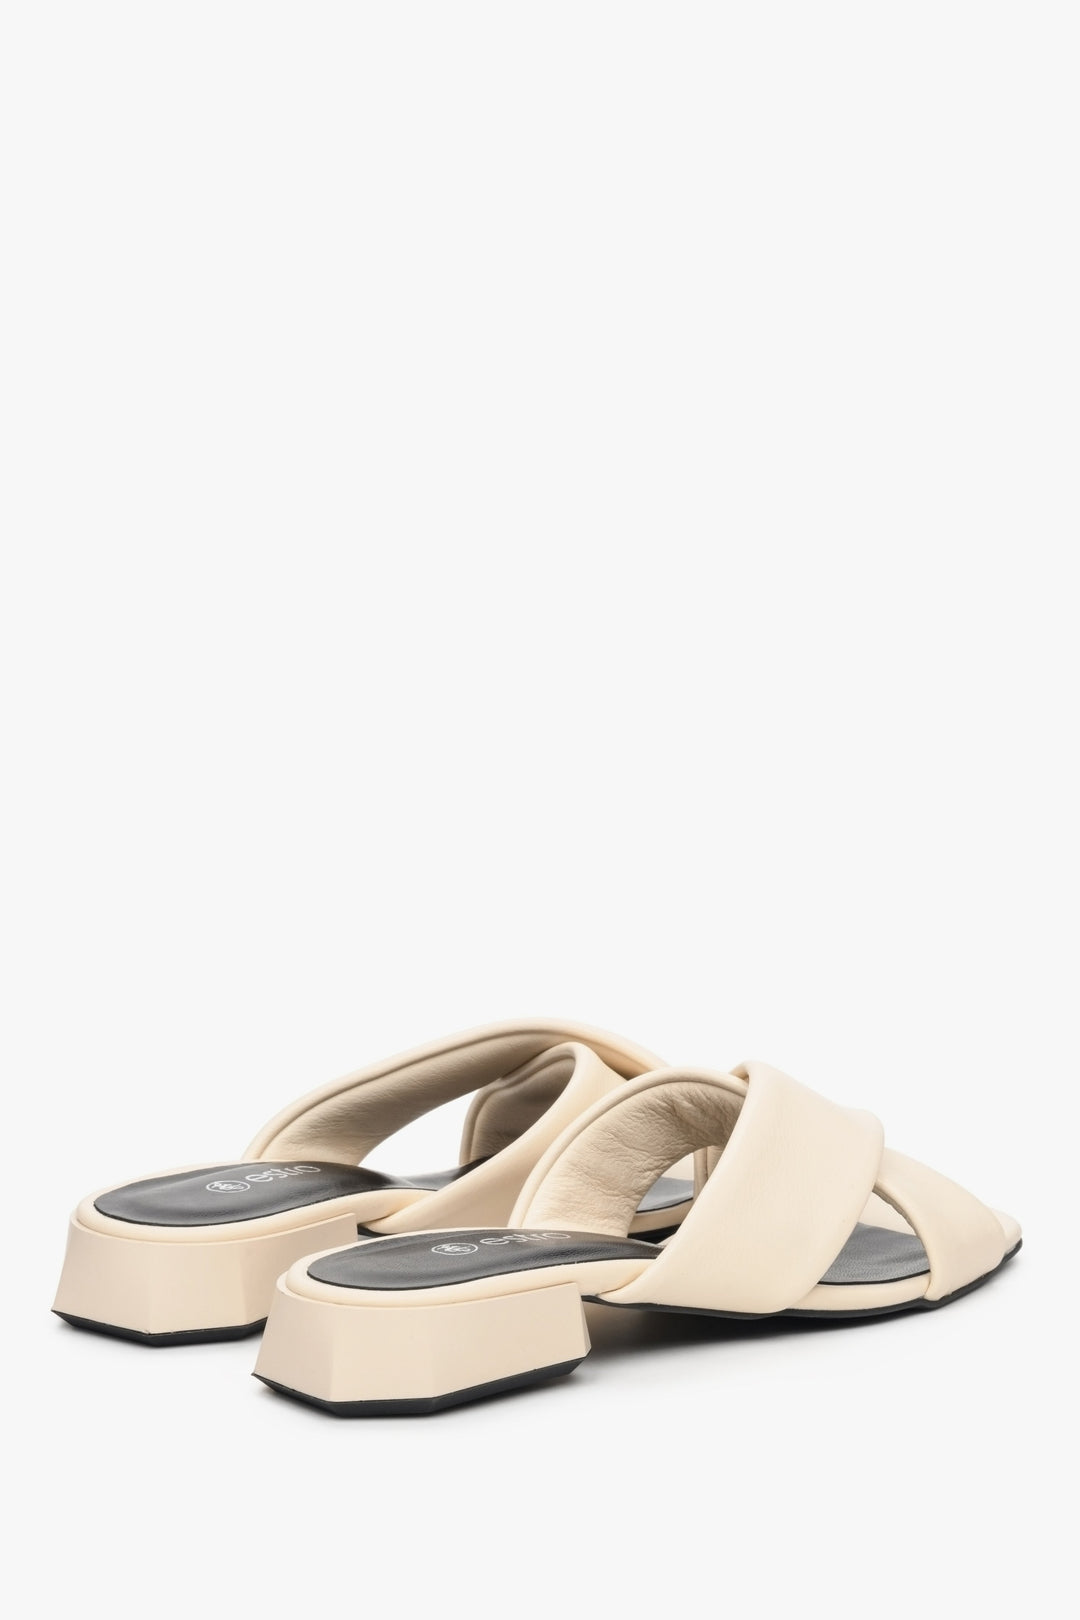 Women's low-heeled leather mules in beige - close-up on back tip of the shoe.